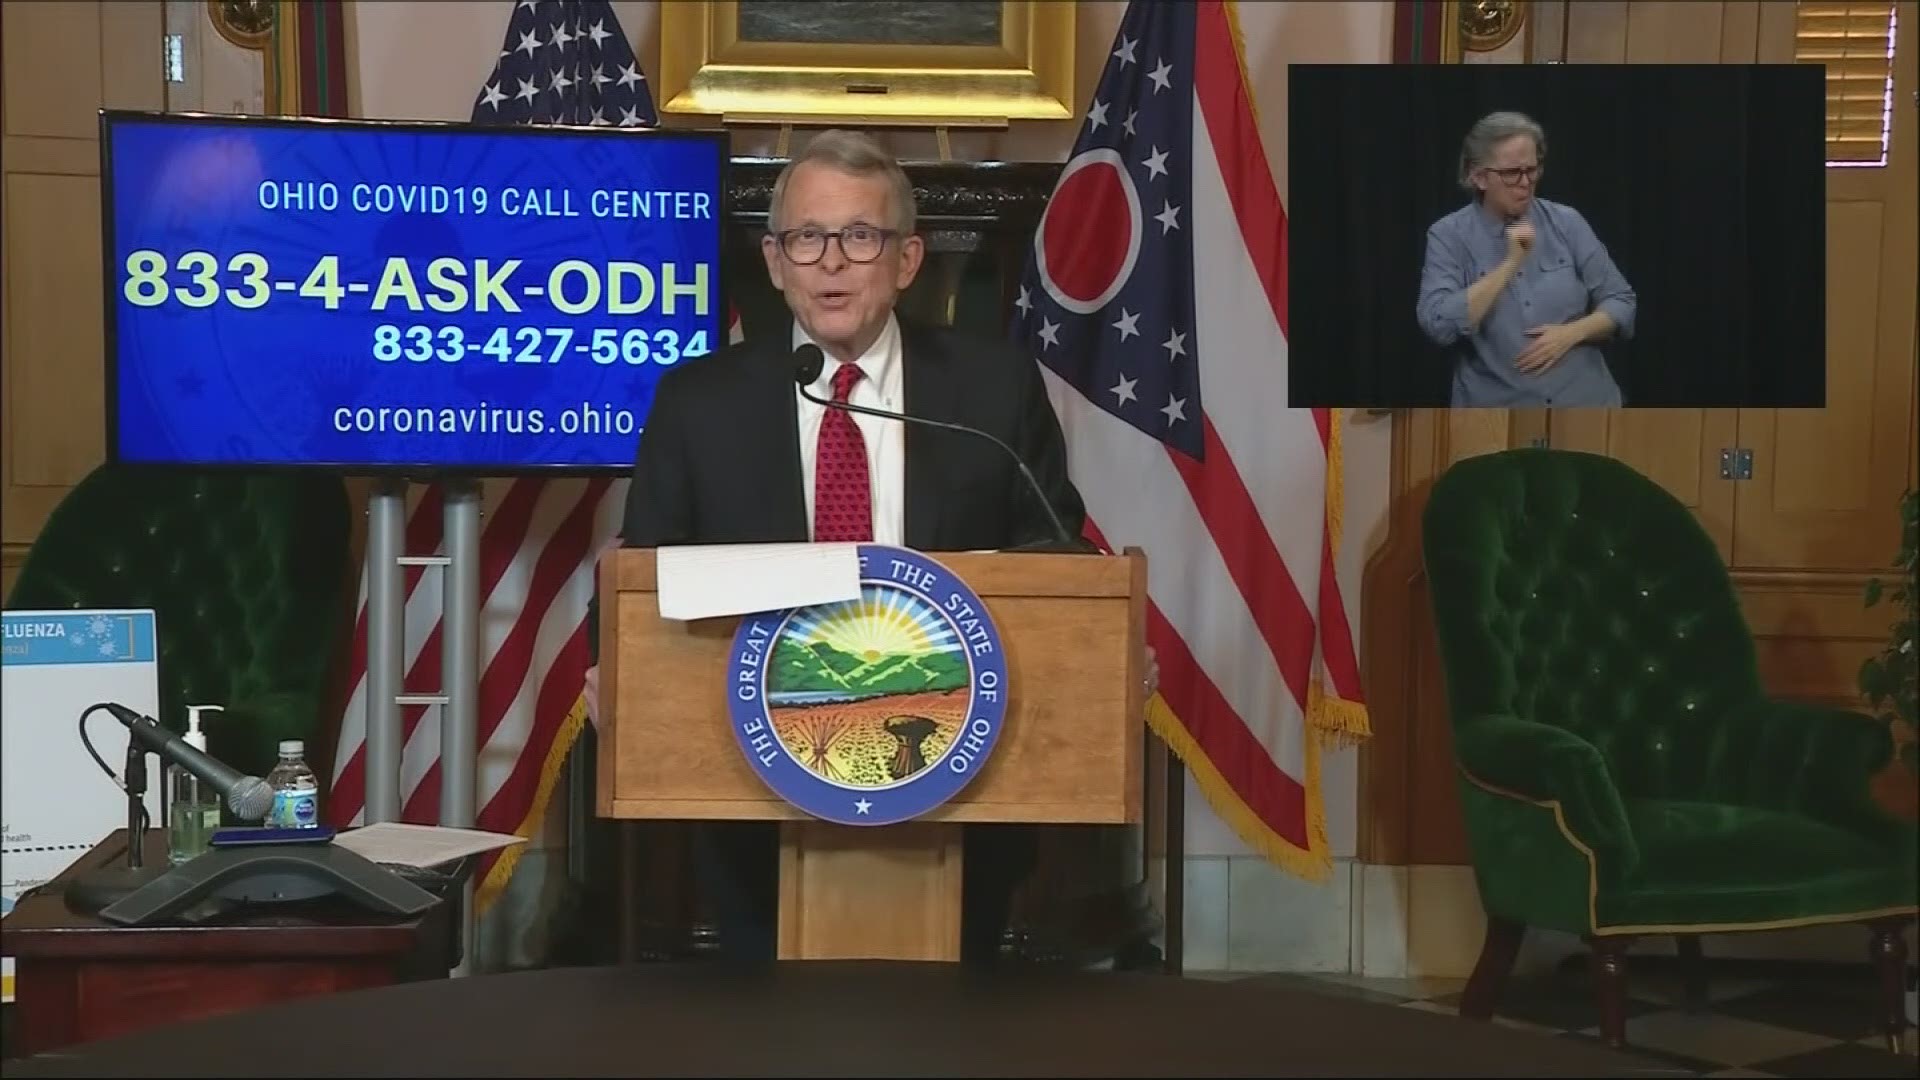 "We are Ohioans. We are Buckeyes. We are Strong."